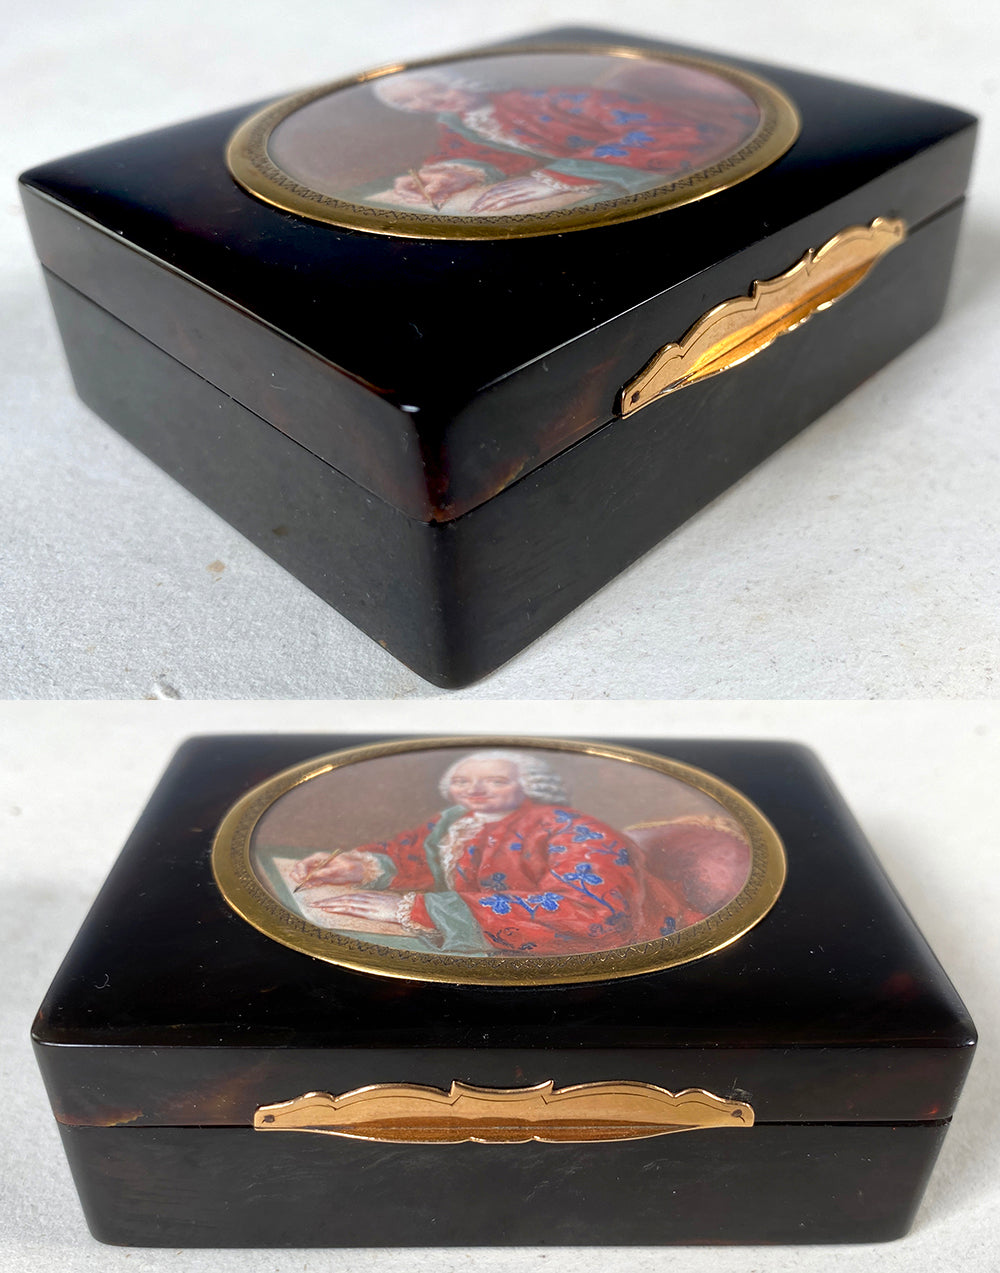 Exceptional 18th Century Portrait Miniature Louis XVI, 18k Gold on Tortoise Shell Patch or Snuff Box